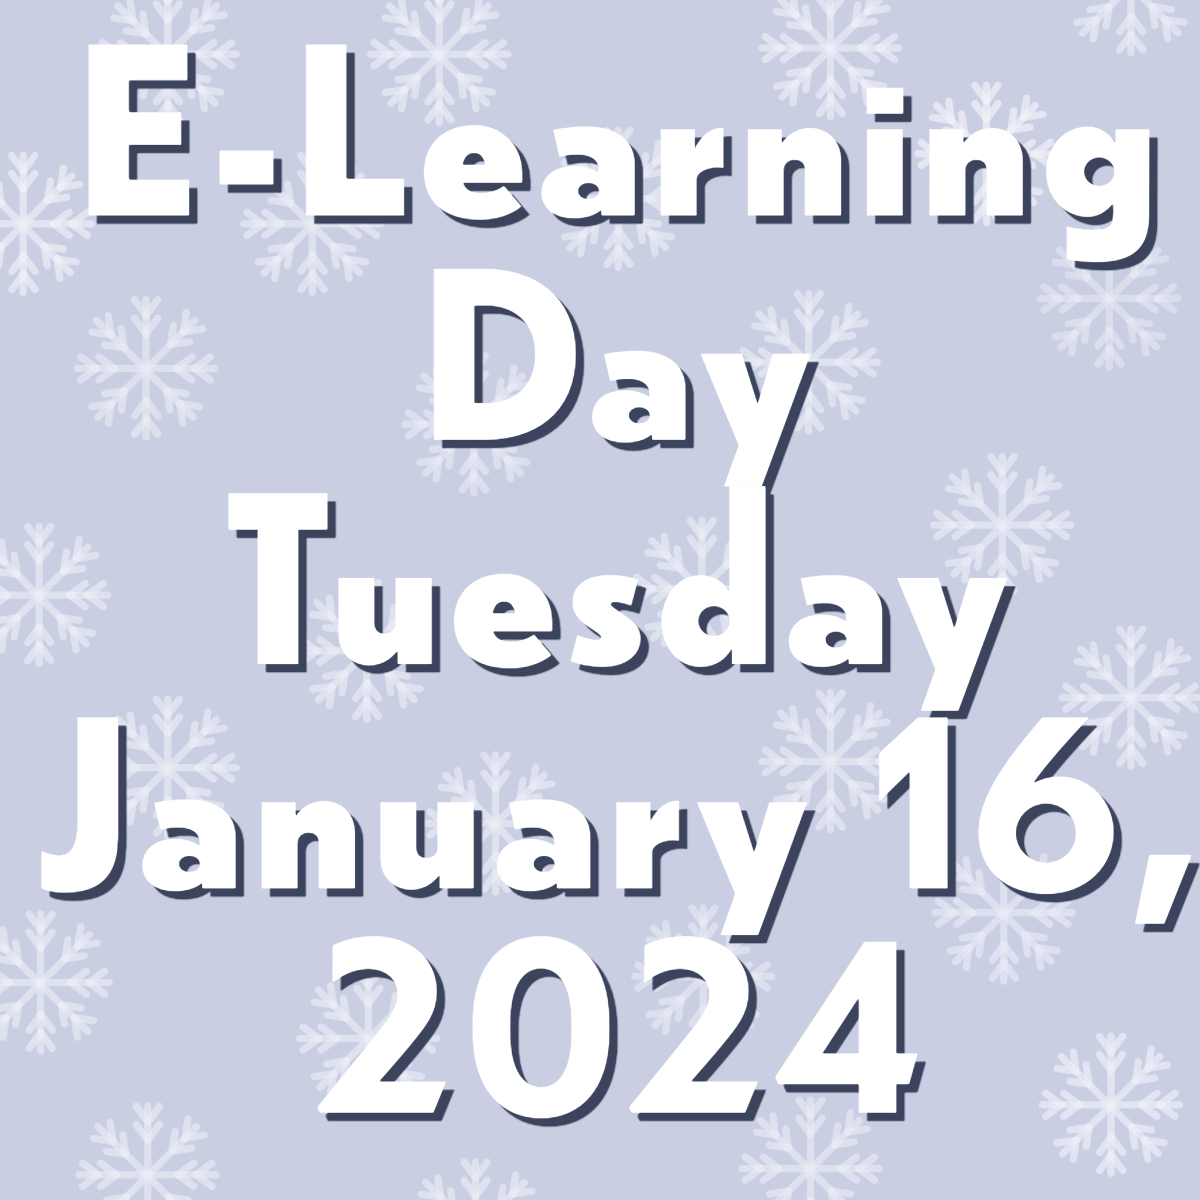 E-Learning Day